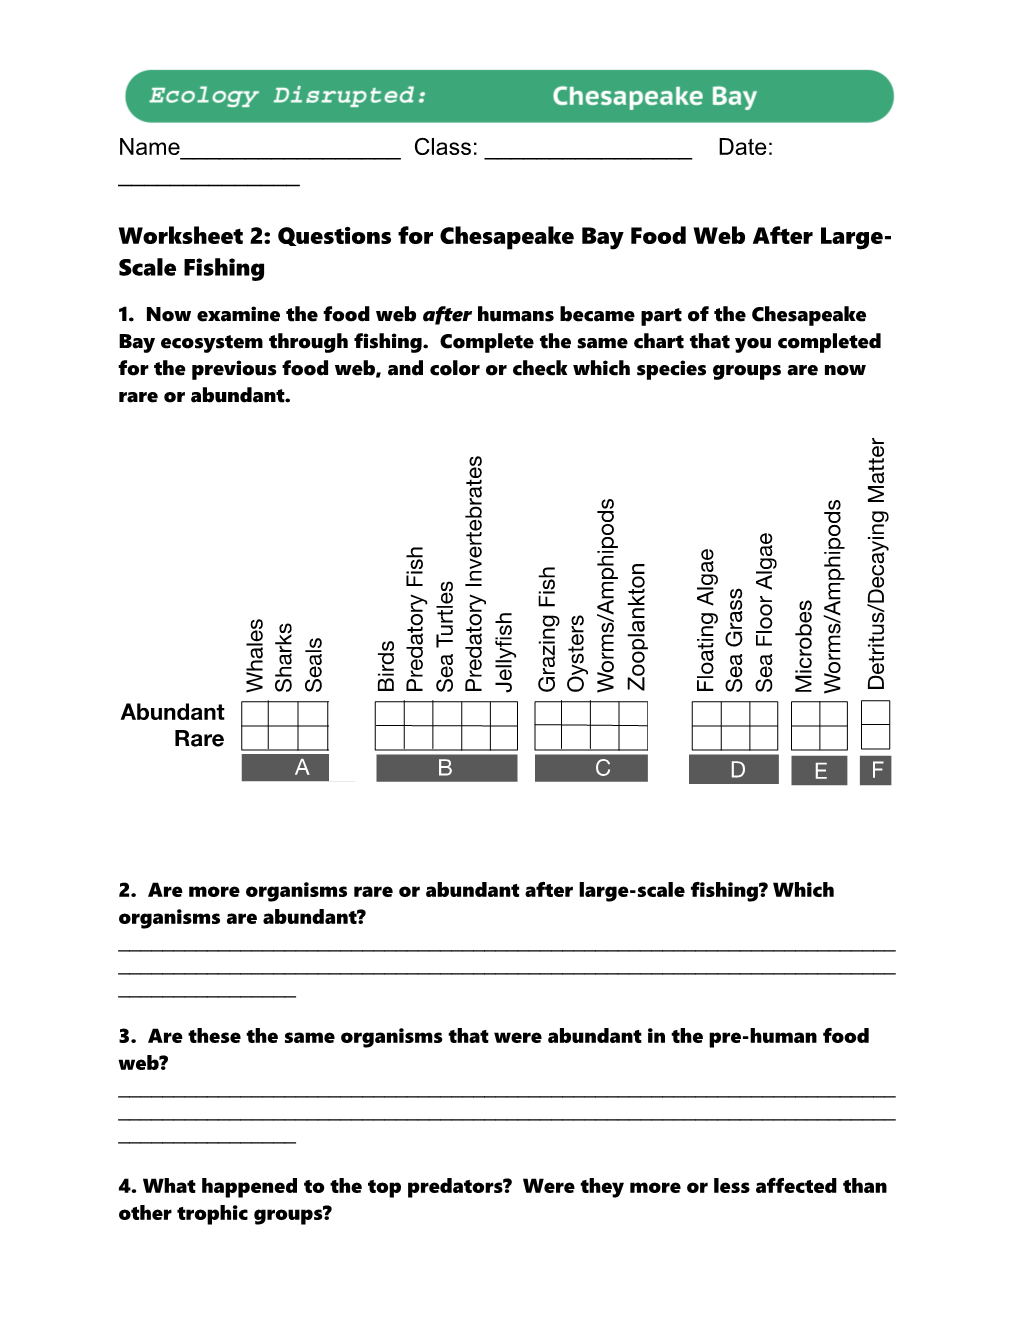 Worksheet 2: Questions for Chesapeake Bay Food Web After Large- Scale Fishing